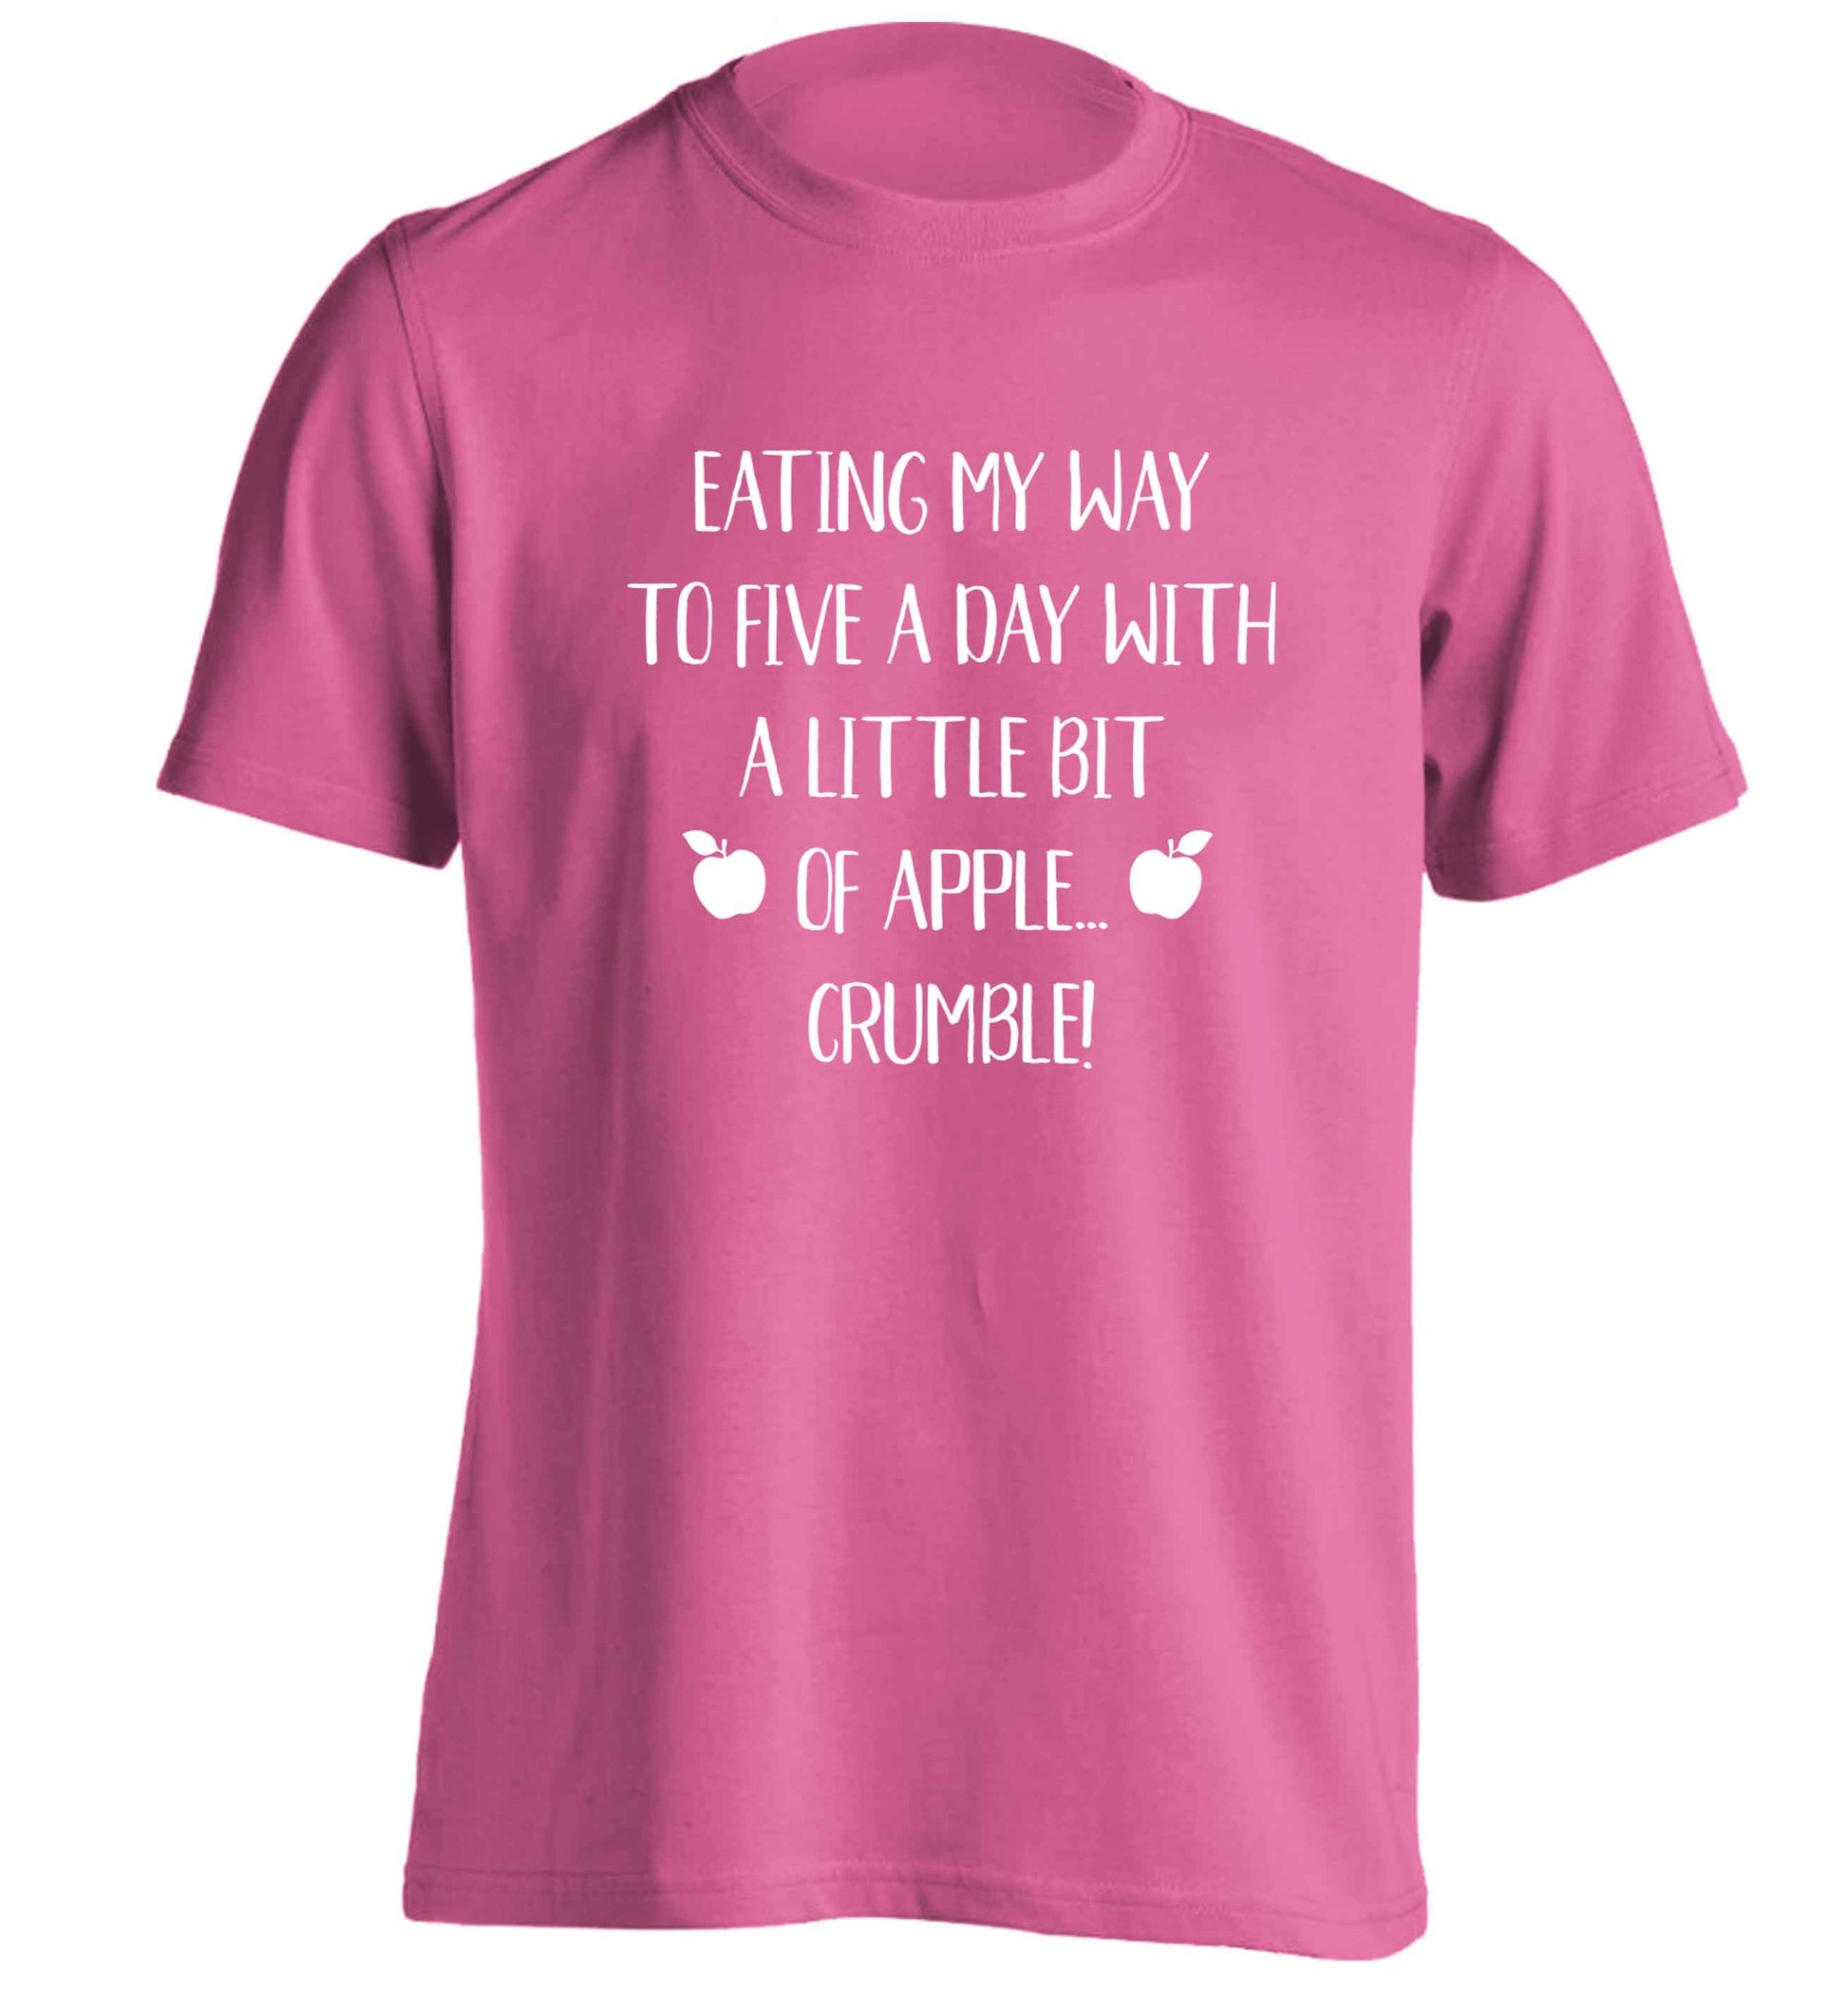 Eating my way to five a day with a little bit of apple crumble adults unisex pink Tshirt 2XL